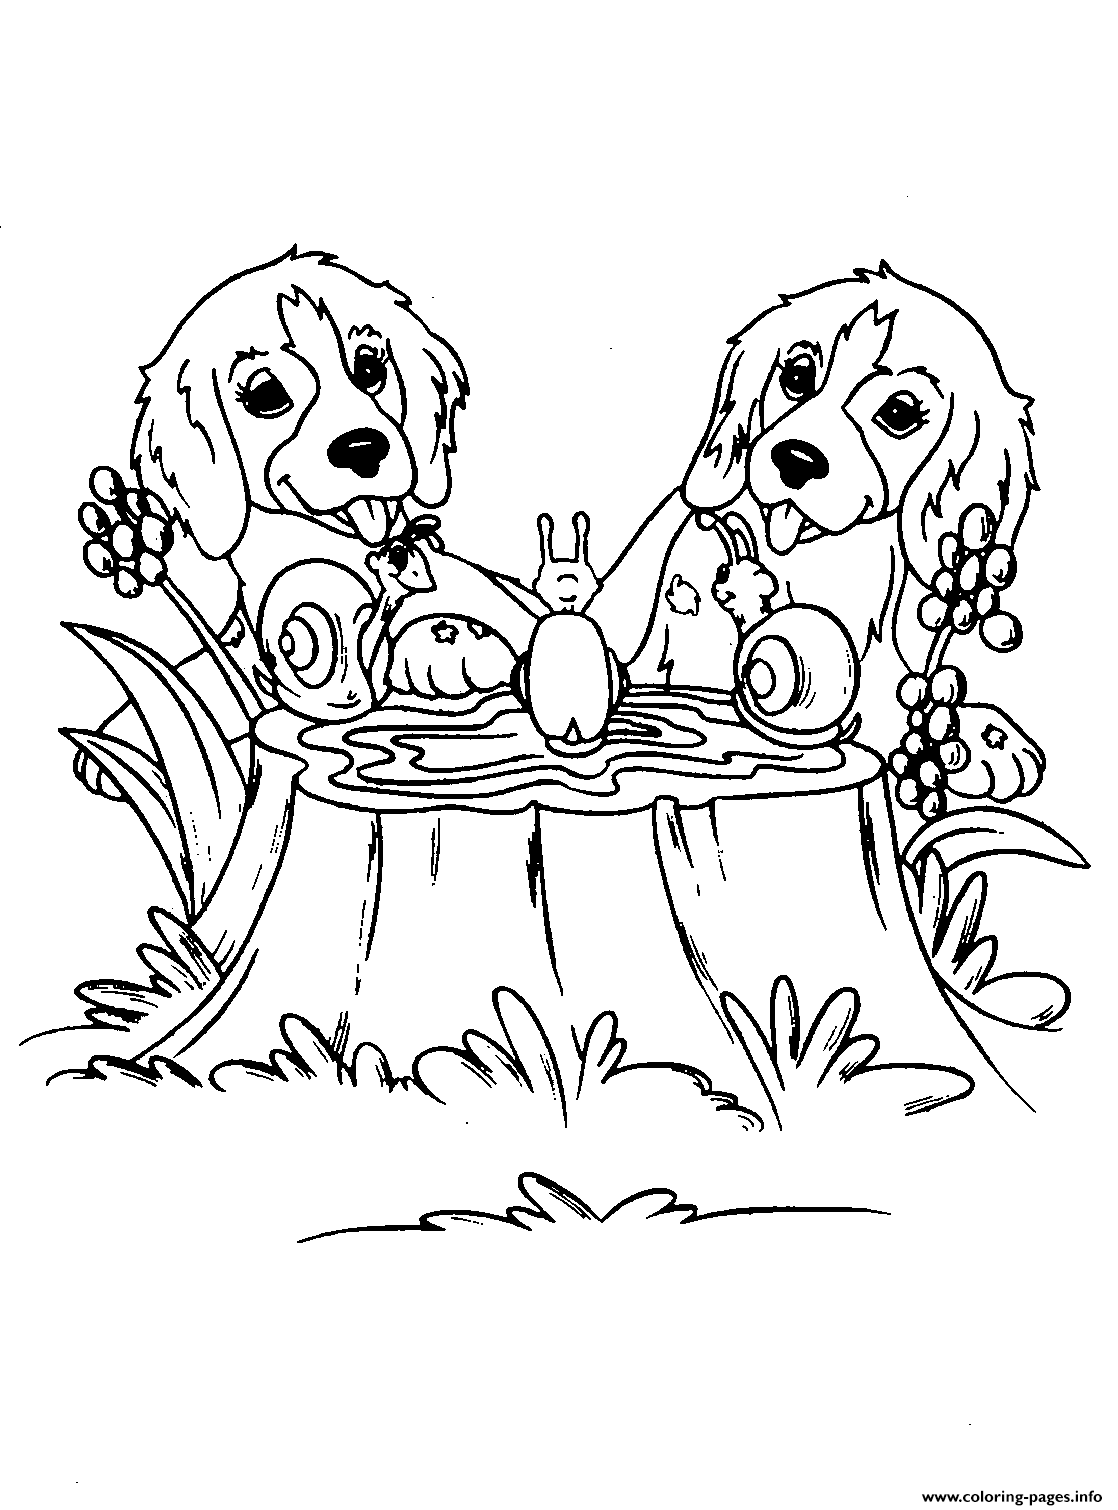 Dogs And Snails 97c4 coloring